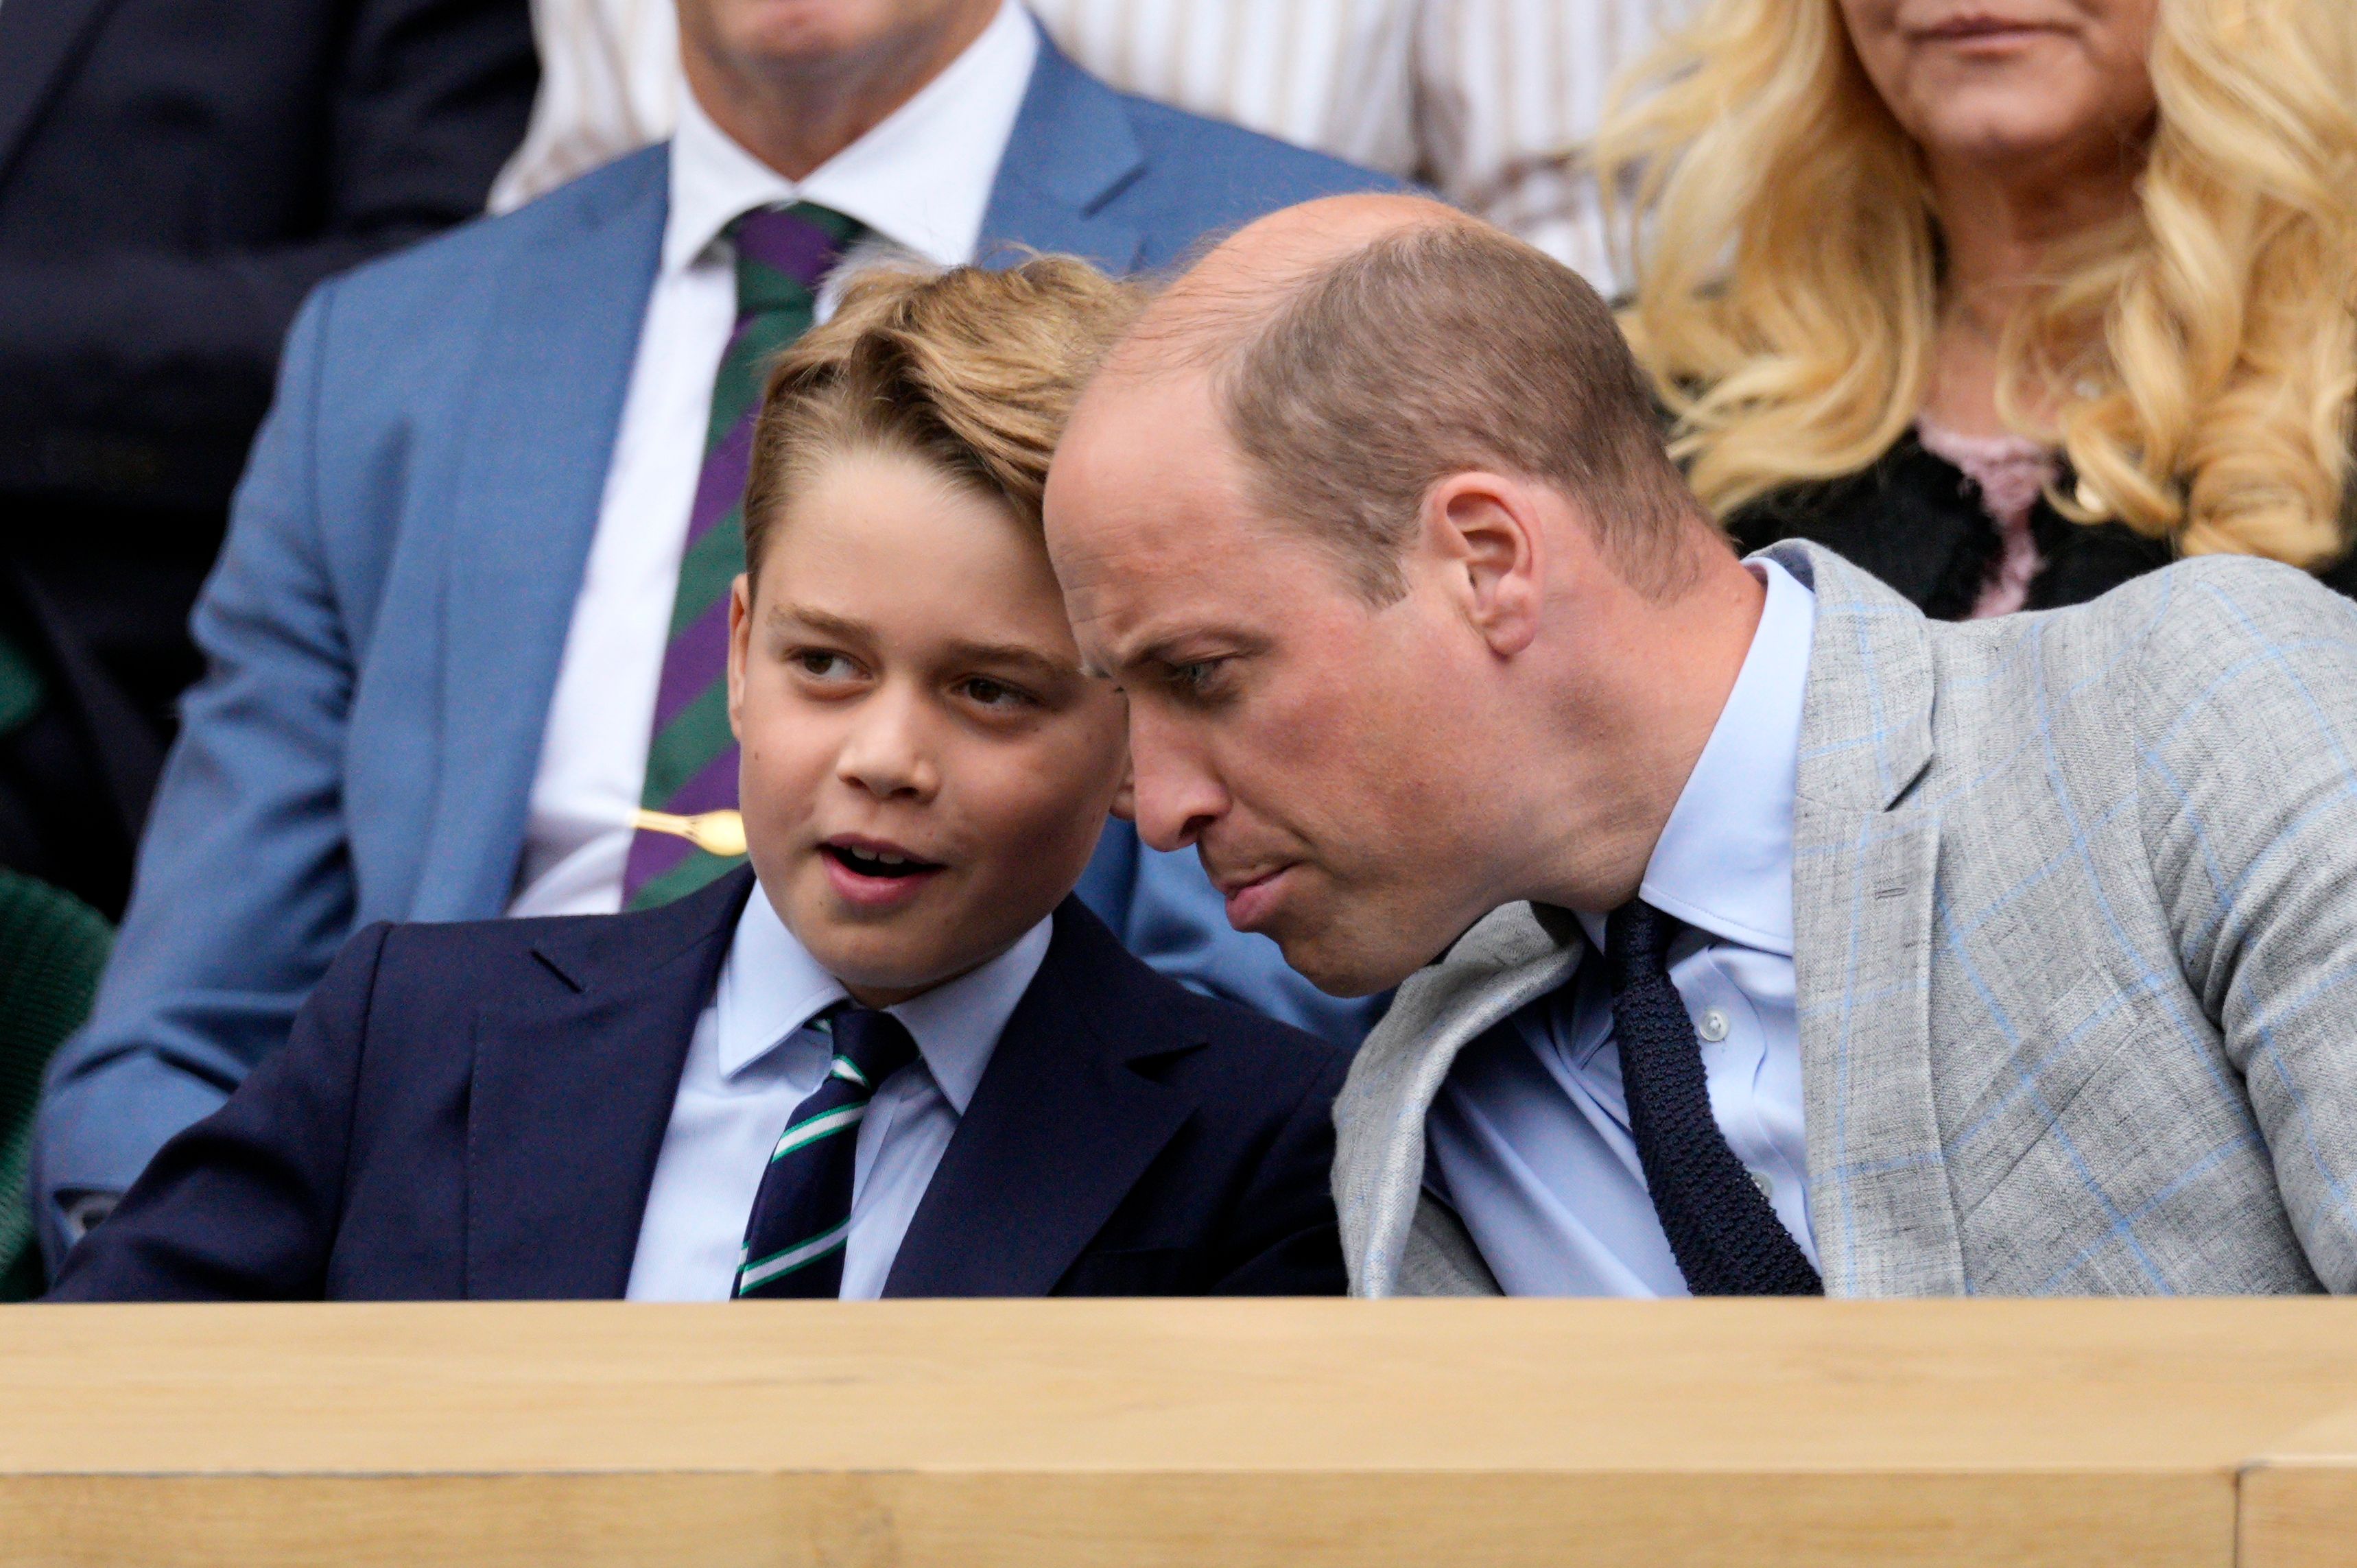 <p>Prince George talked to dad <a href="https://www.wonderwall.com/celebrity/profiles/overview/prince-william-482.article">Prince William</a> during the Men's Singles final match as they watch Carlos Alcaraz play Novak Djokovic from the Royal Box on Centre Court on day 14 of the <a href="https://www.wonderwall.com/celebrity/wimbledon-2023-the-best-pictures-of-royals-and-stars-at-the-tennis-championships-758994.gallery">Wimbledon Tennis Championships</a> at the All England Lawn Tennis and Croquet Club in London on July 16, 2023.</p>